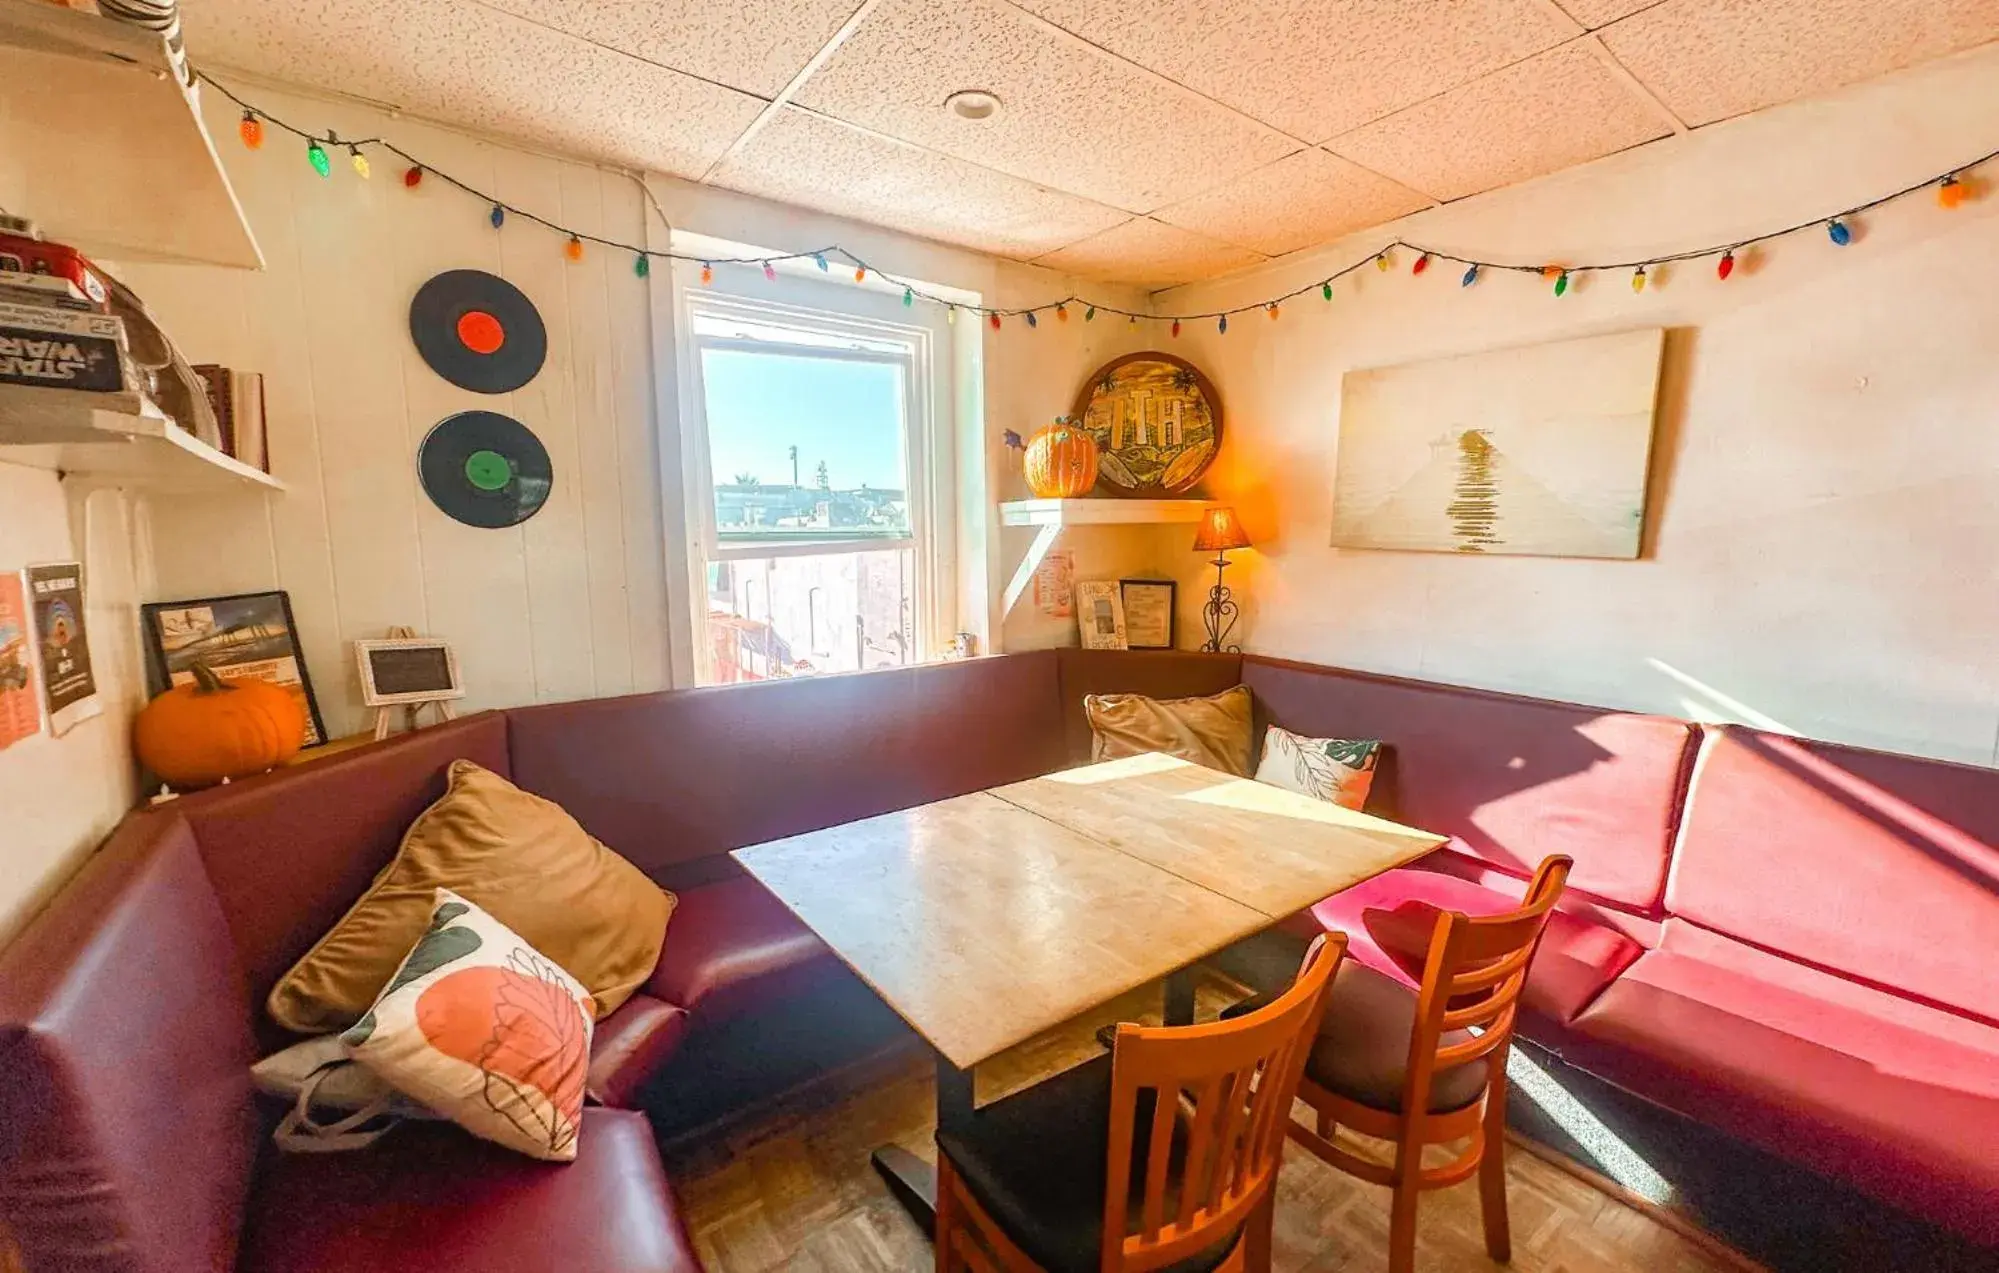 Dining Area in ITH Surf City Hostel Hermosa Beach